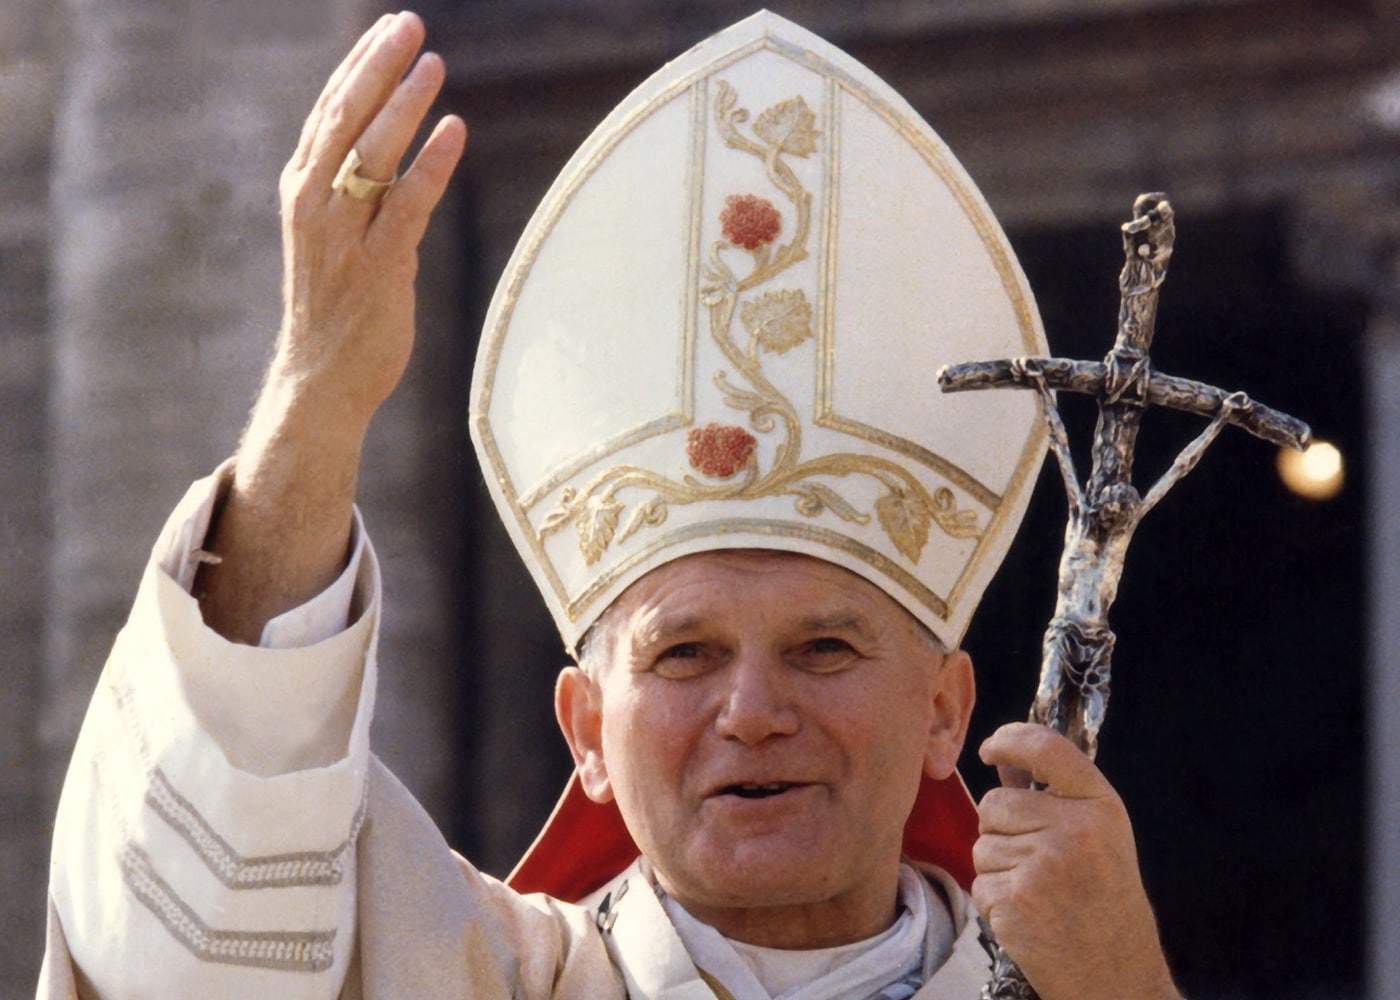 Pope St. John Paul II was prolific in his social commentary and magisterial teaching, penning four major social encyclicals.